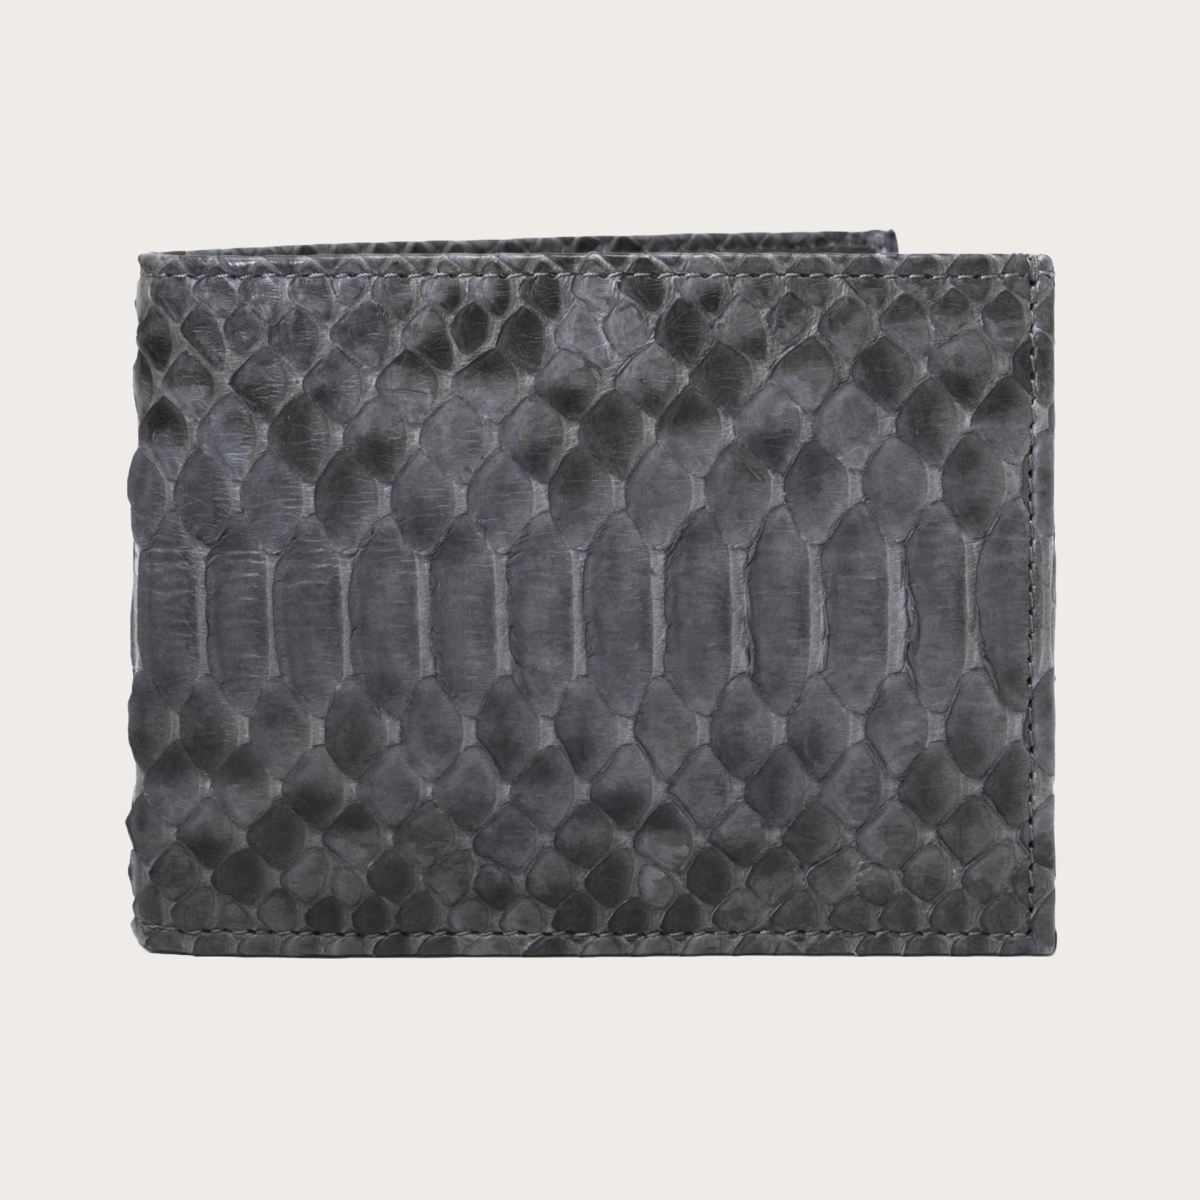 BRUCLE Python leather wallet in grey with coin purse